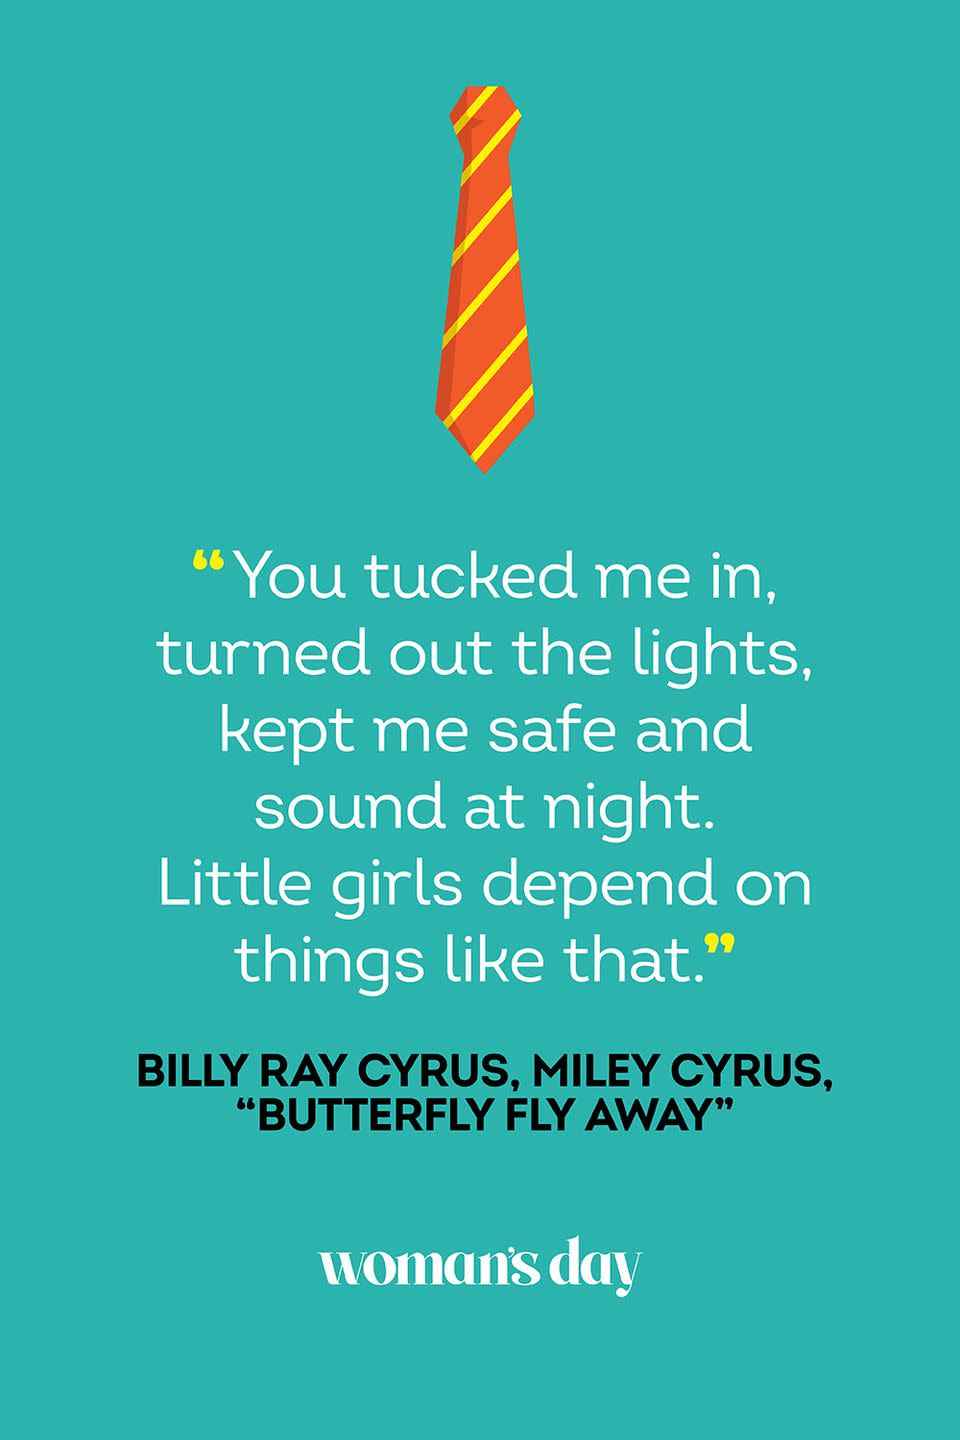 fathers day quotes billy ray cyrus miley cyrus butterfly fly away